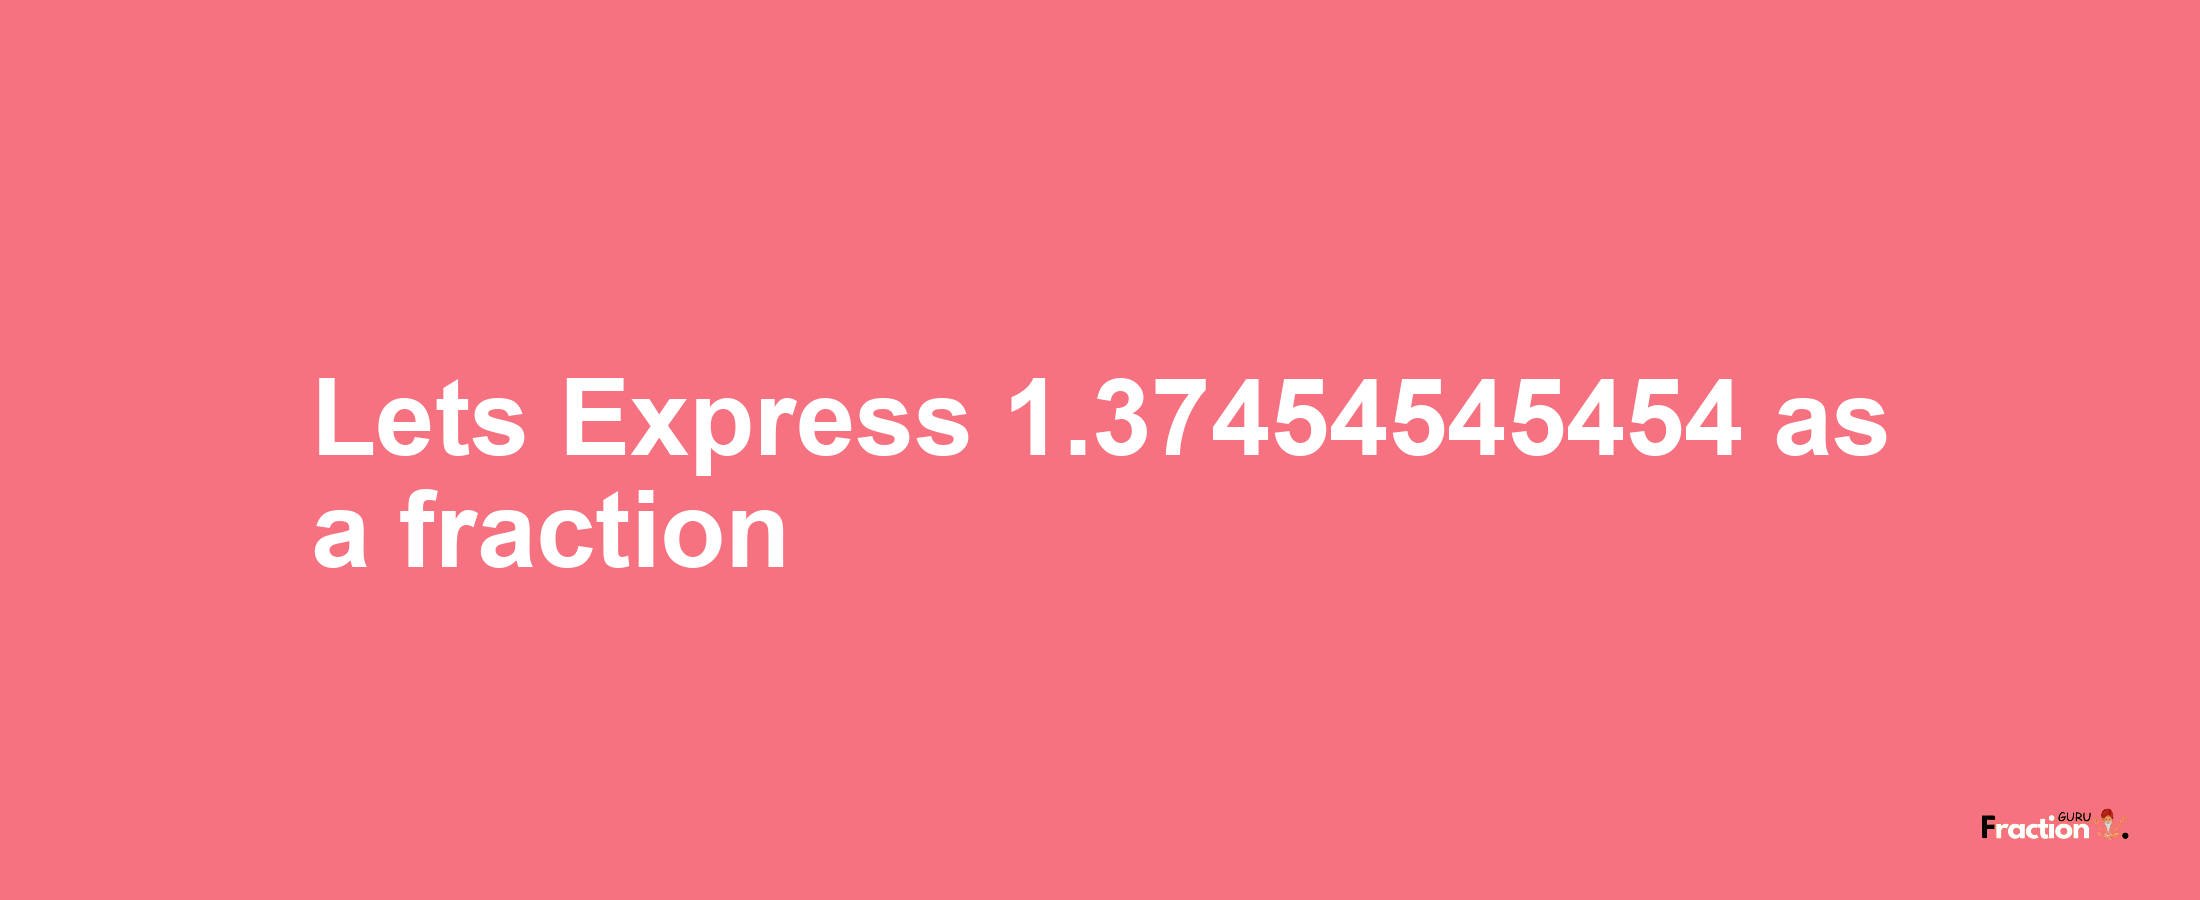 Lets Express 1.37454545454 as afraction